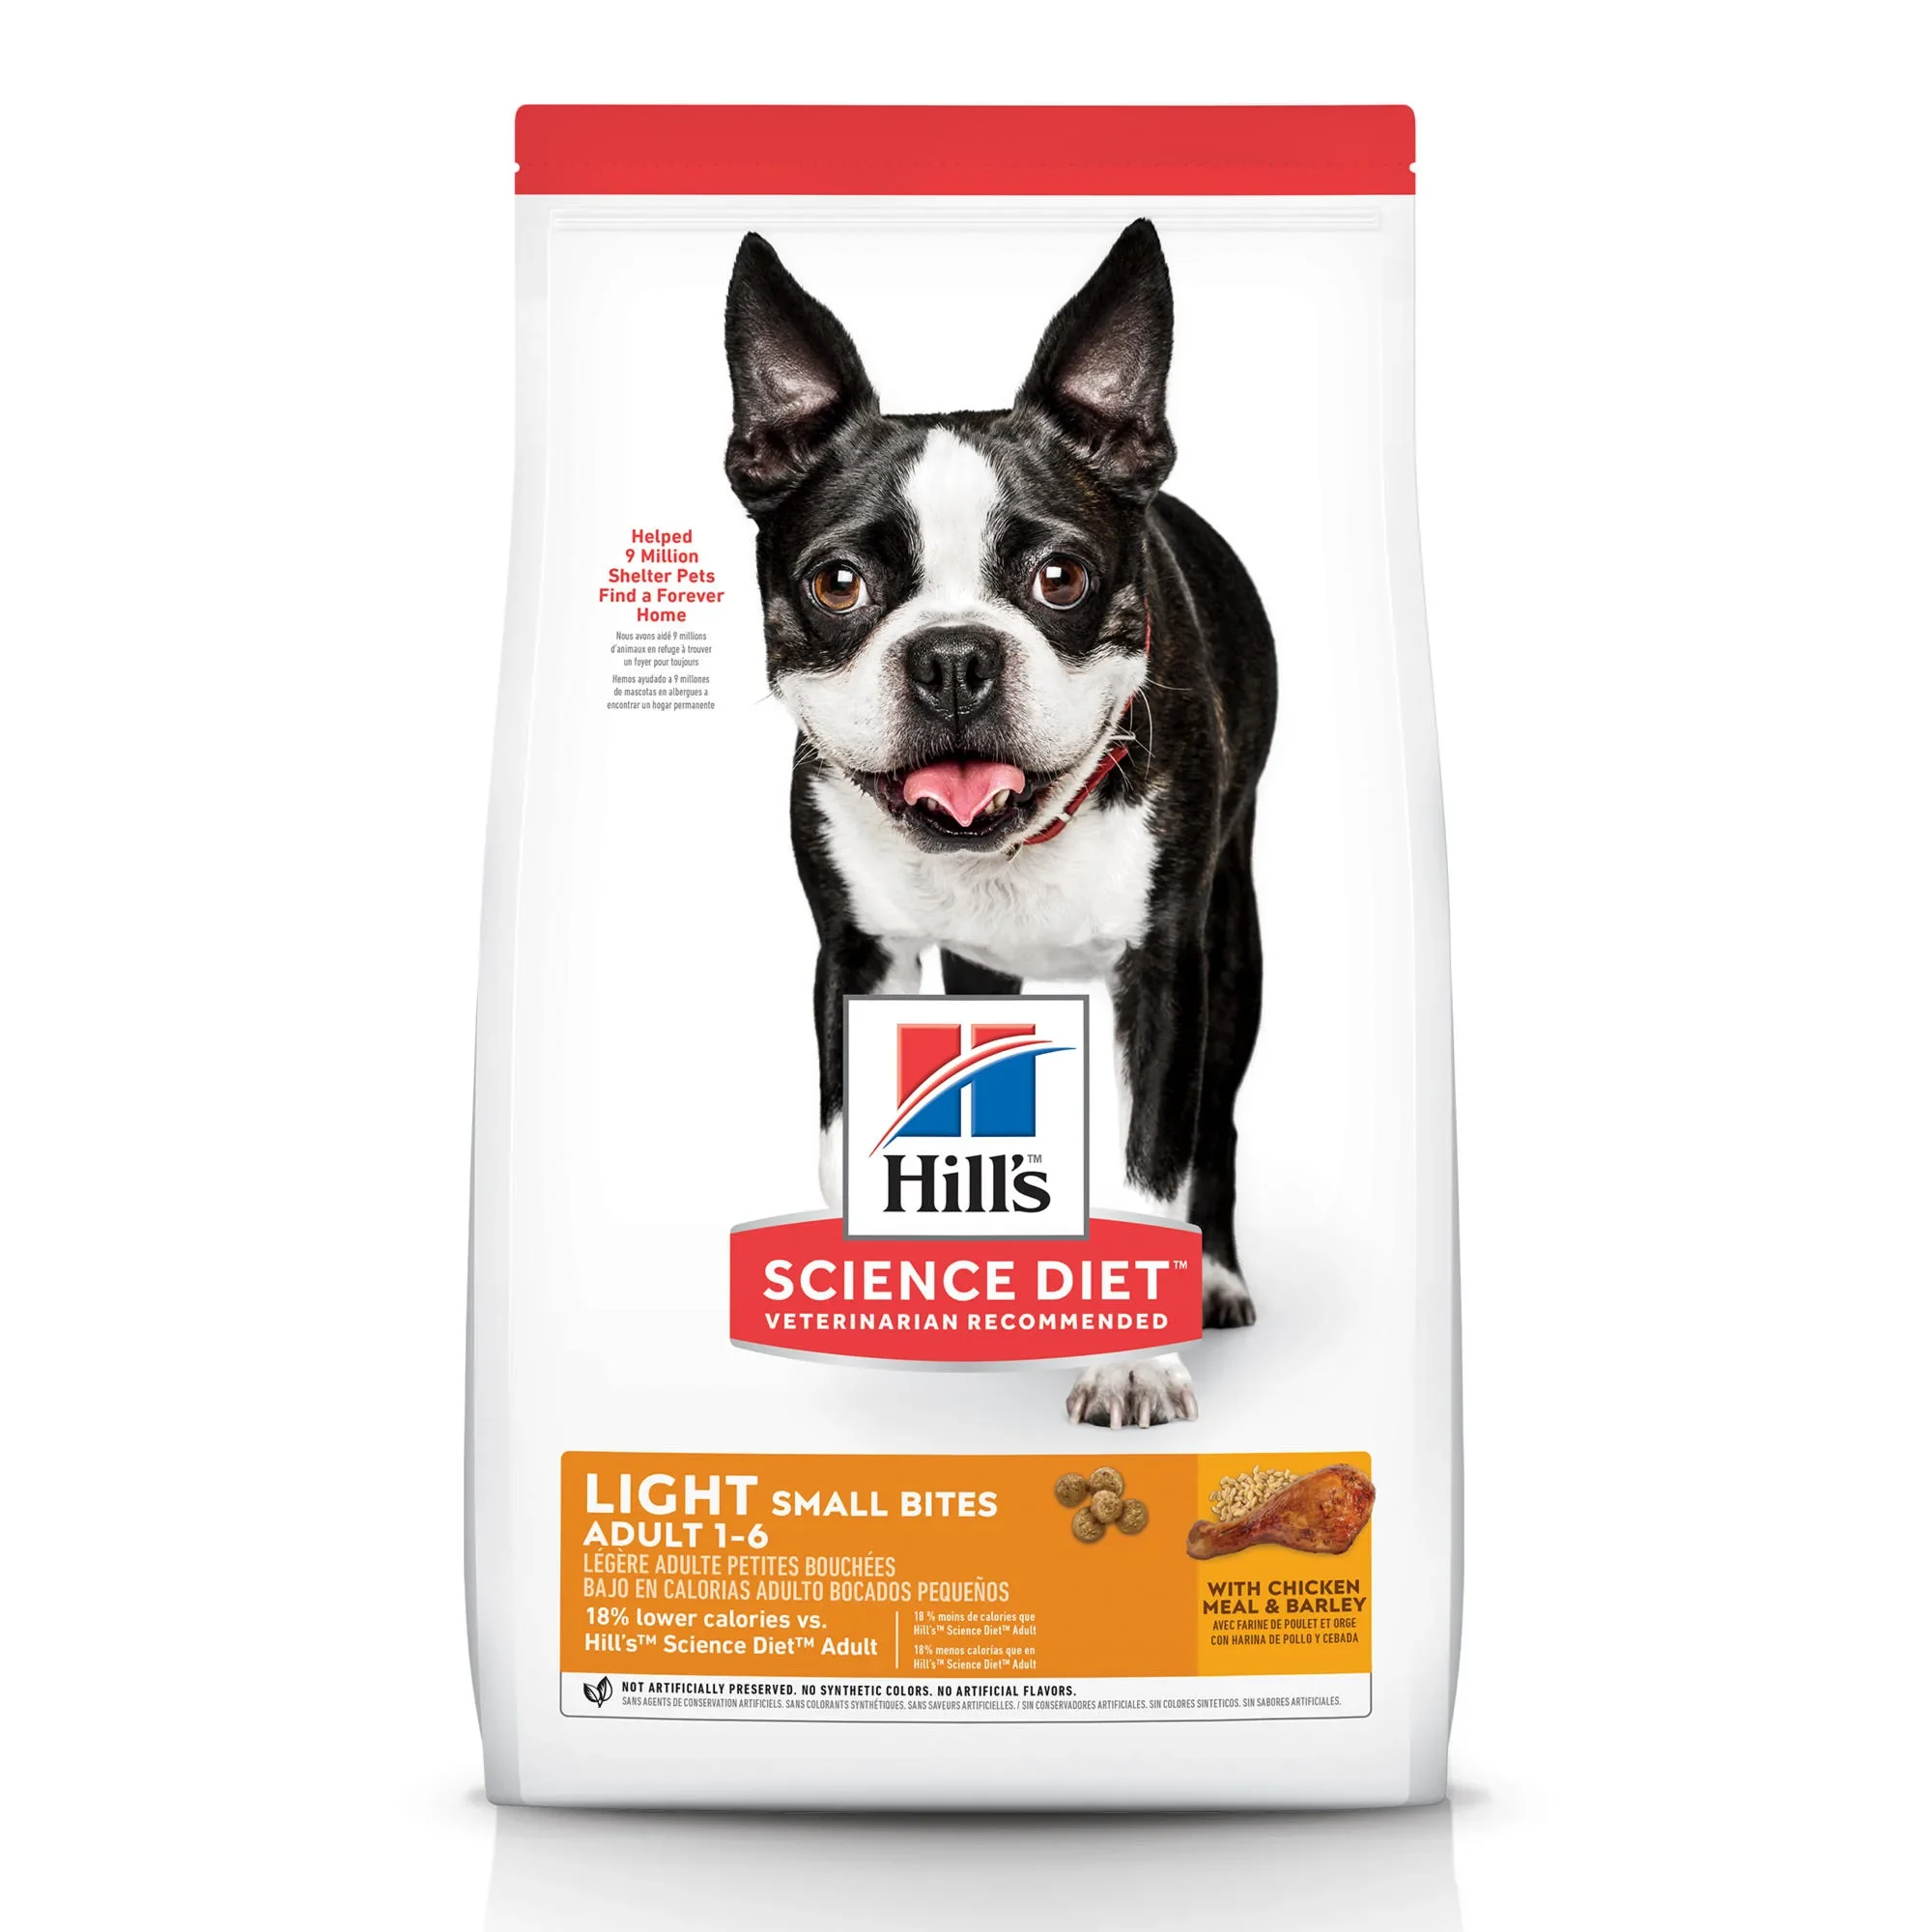 vet rated dog food